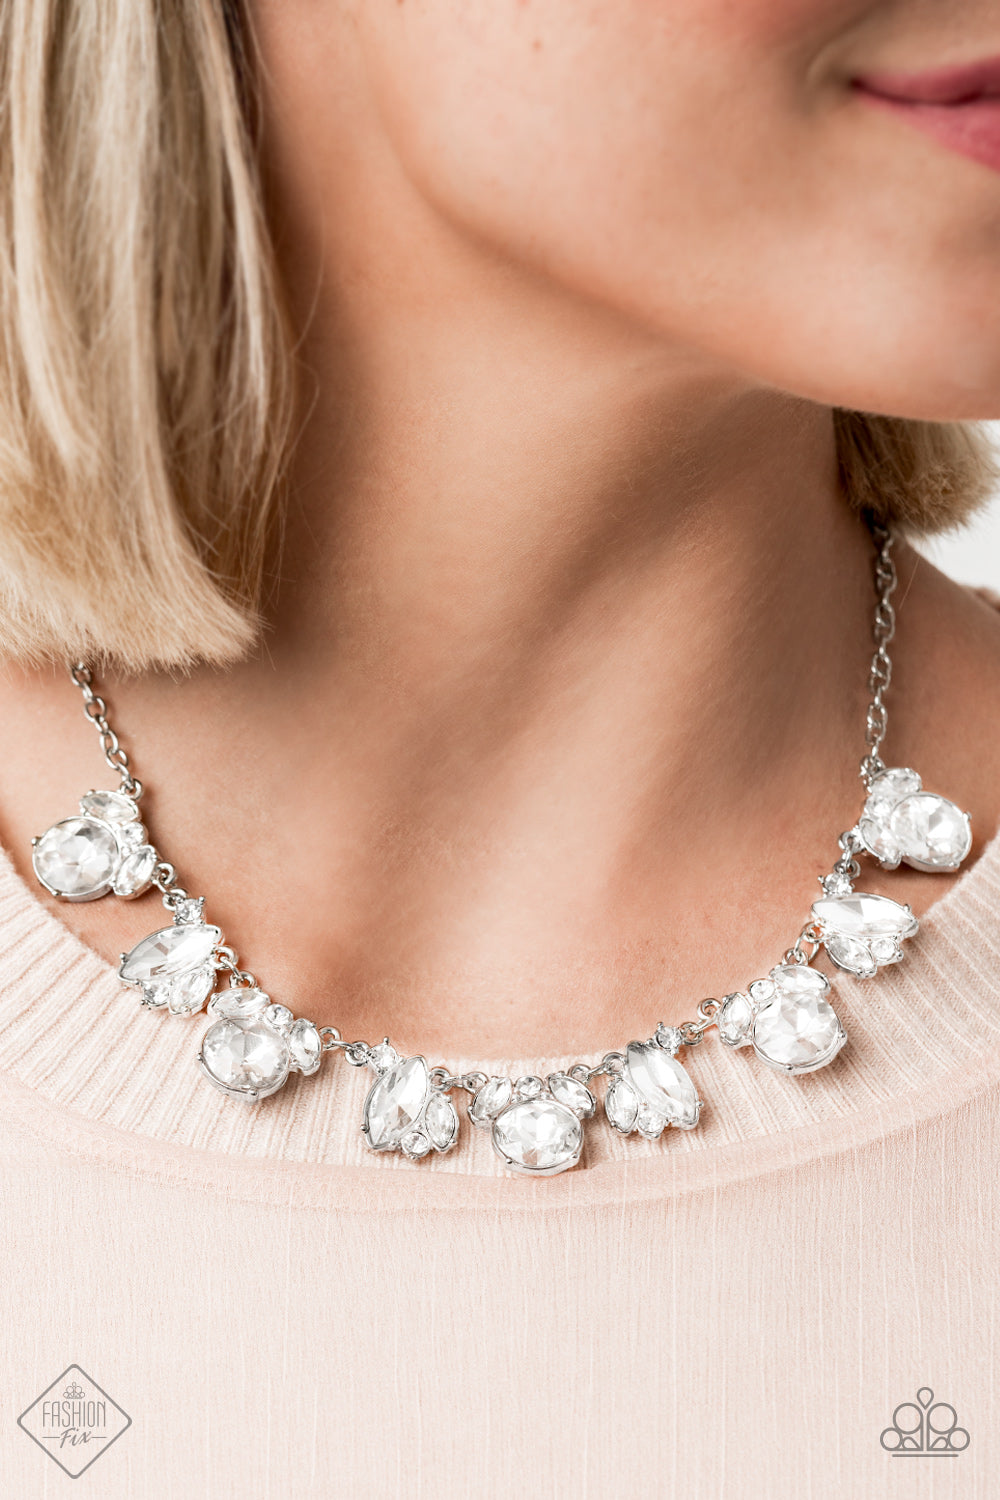 BLING To Attention- White and Silver Necklace- Paparazzi Accessories